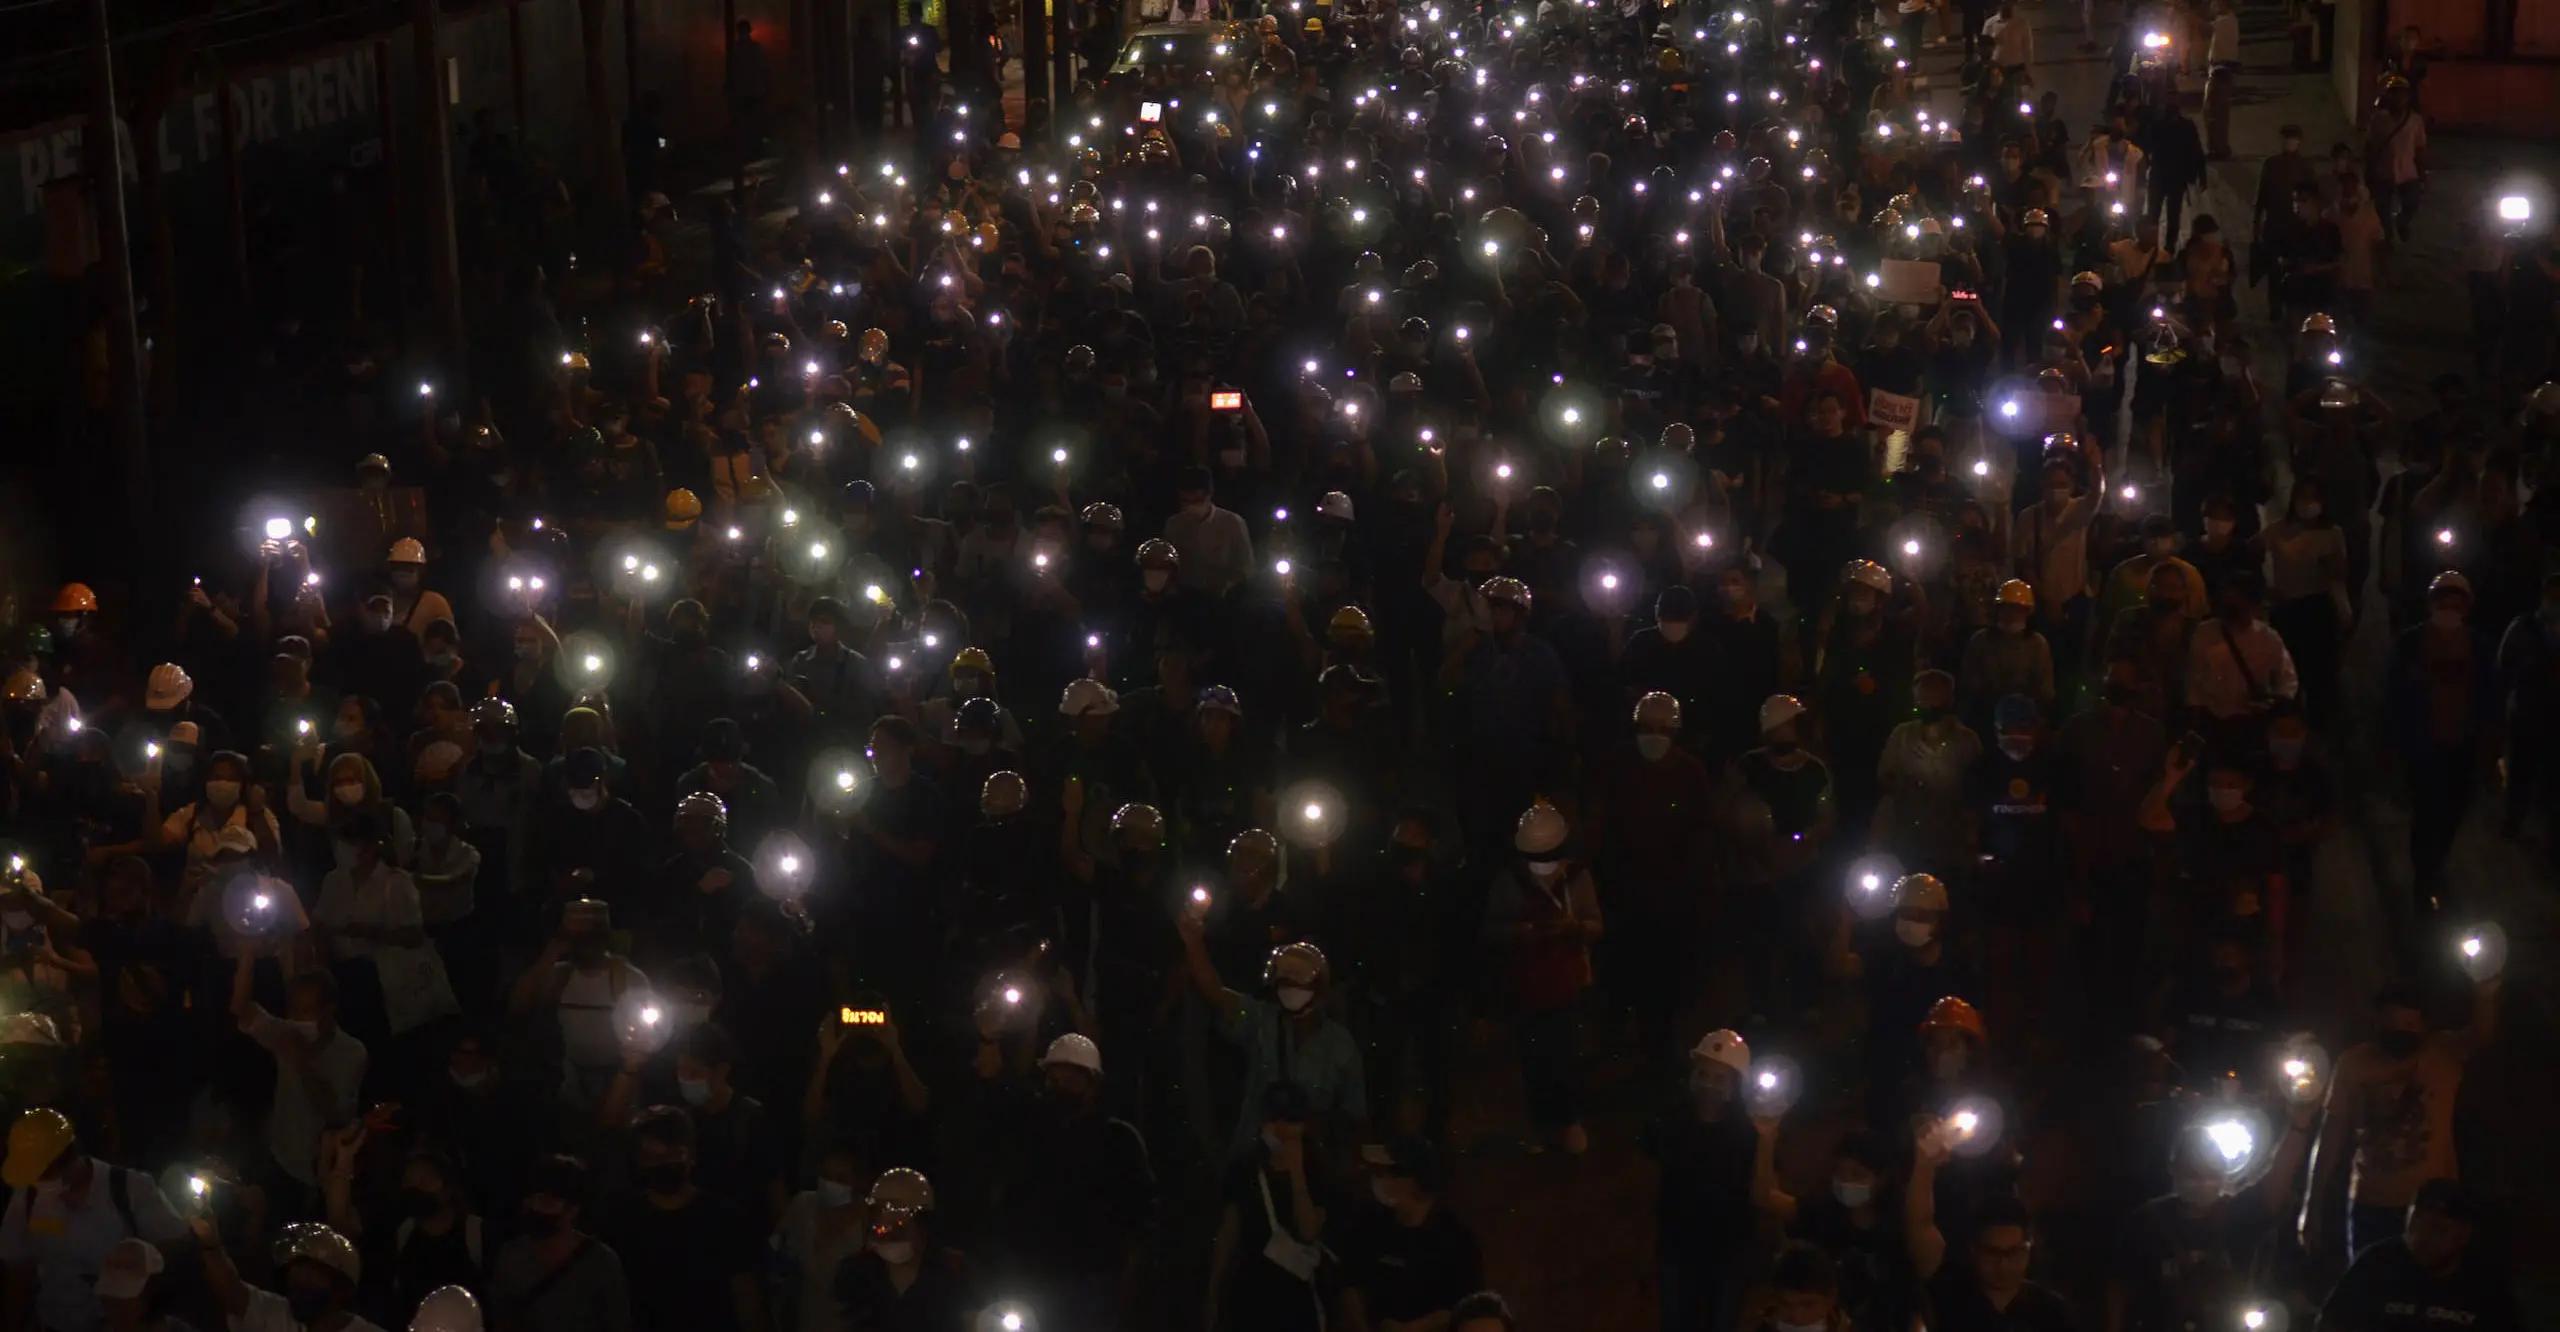 A photograph of a crowd of people holding lights in the night.